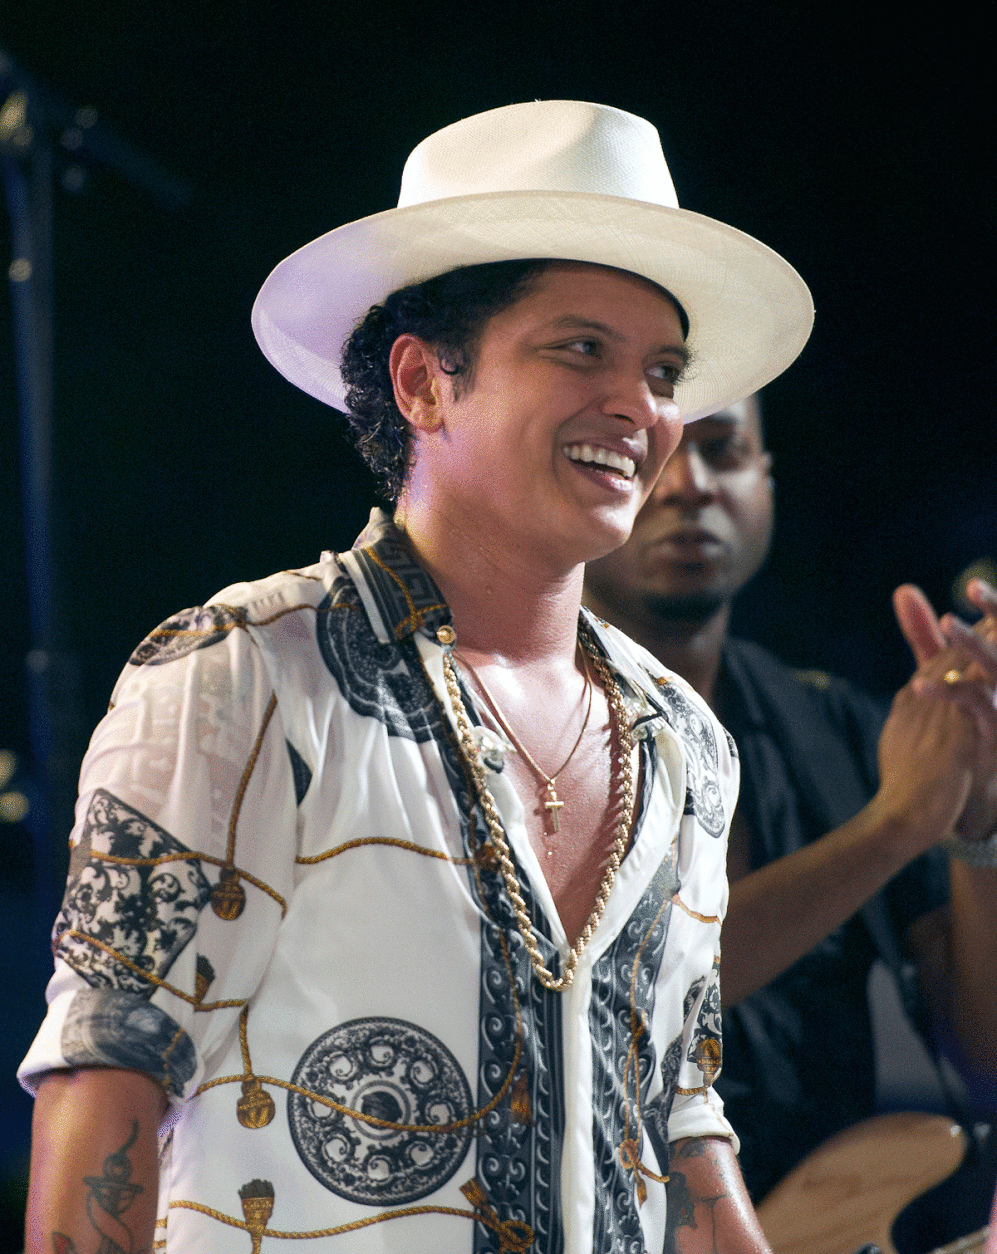 WASHINGTON, DC - JULY 04: Singer Bruno Mars smiles after remarks by U.S. President Barack Obama, accompanied by first lady Michelle Obama, to invited members of the military and White House staff on the South Lawn of the White House on July 4, 2015 in Washington, DC. The guests were treated to a Bruno Mars concert and the traditional fireworks on the National Mall. An earlier Bar-B-Que had been planned but was cancelled due to inclement weather. (Photo by Ron Sachs - Pool/Getty Images)